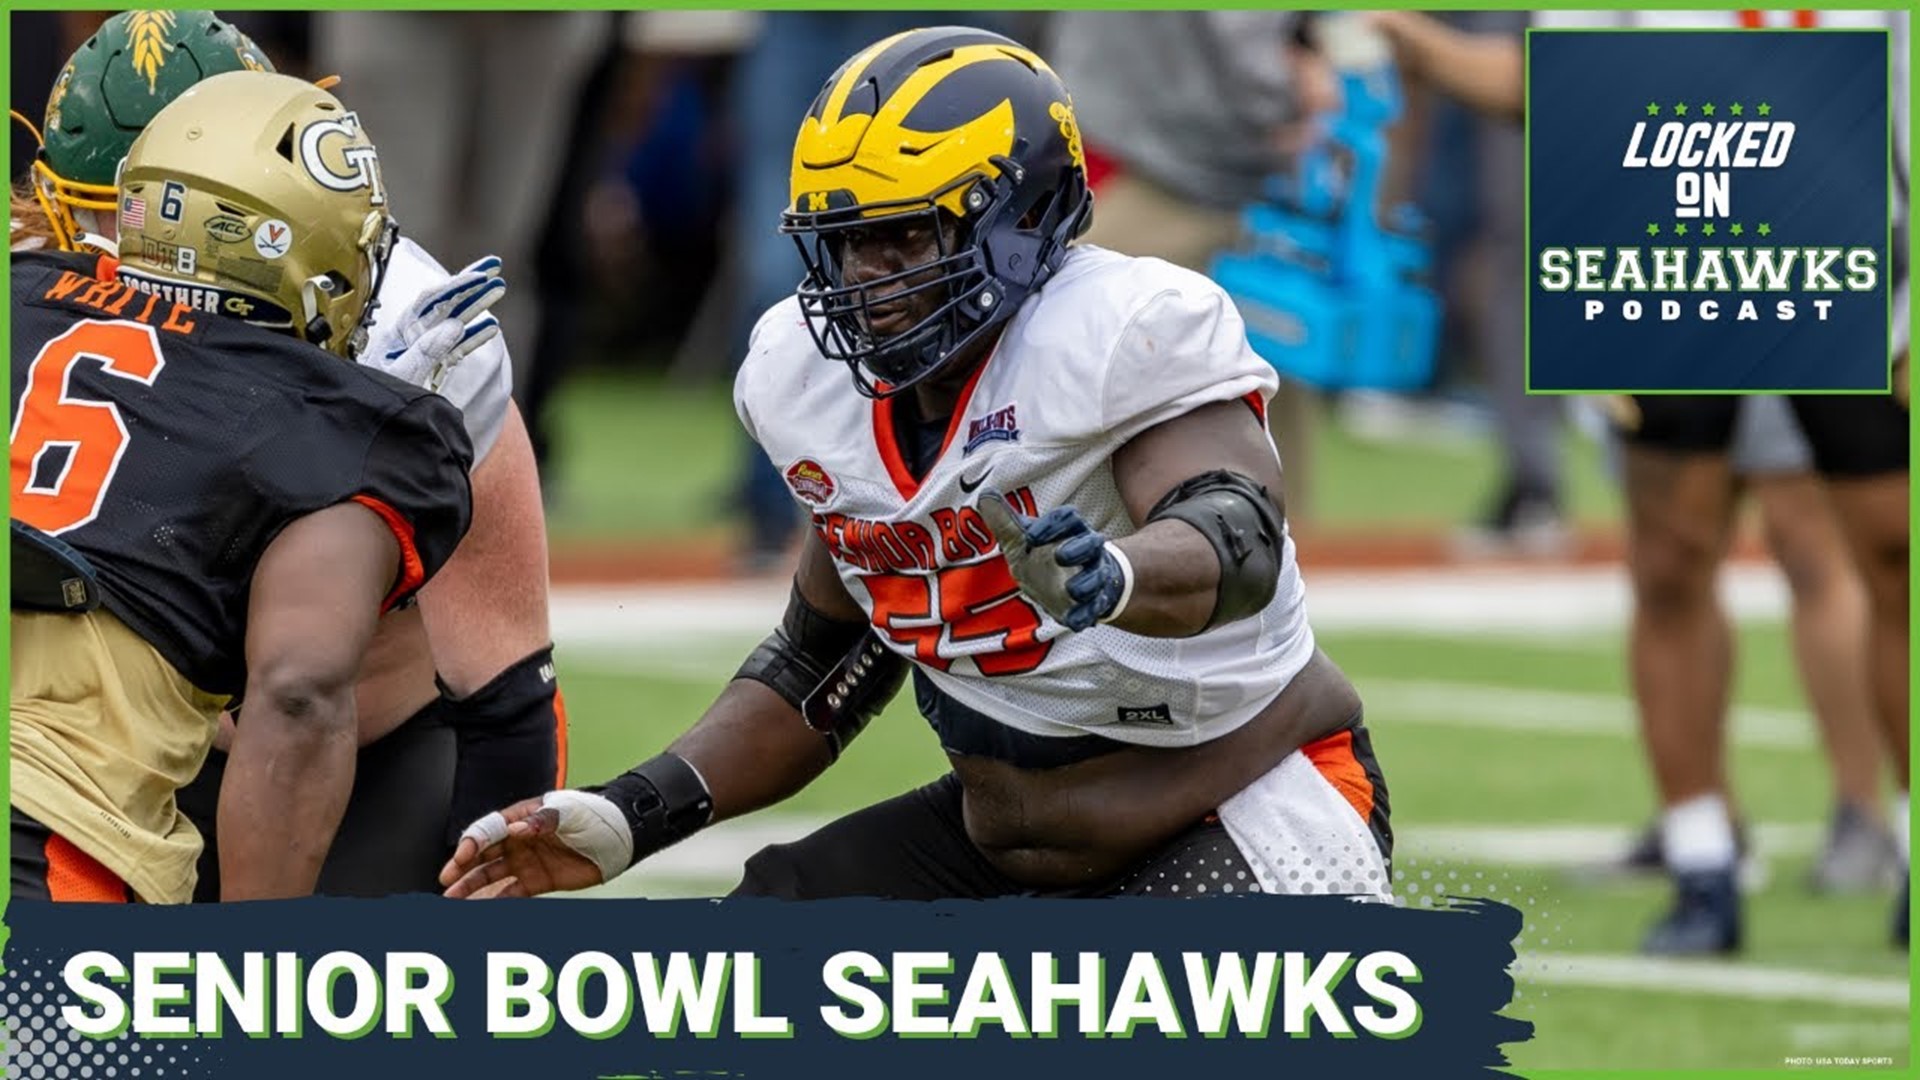 As the saying goes, the NFL Draft always starts in Mobile and the Seahawks continued to take advantage of selecting top talent from the Senior Bowl